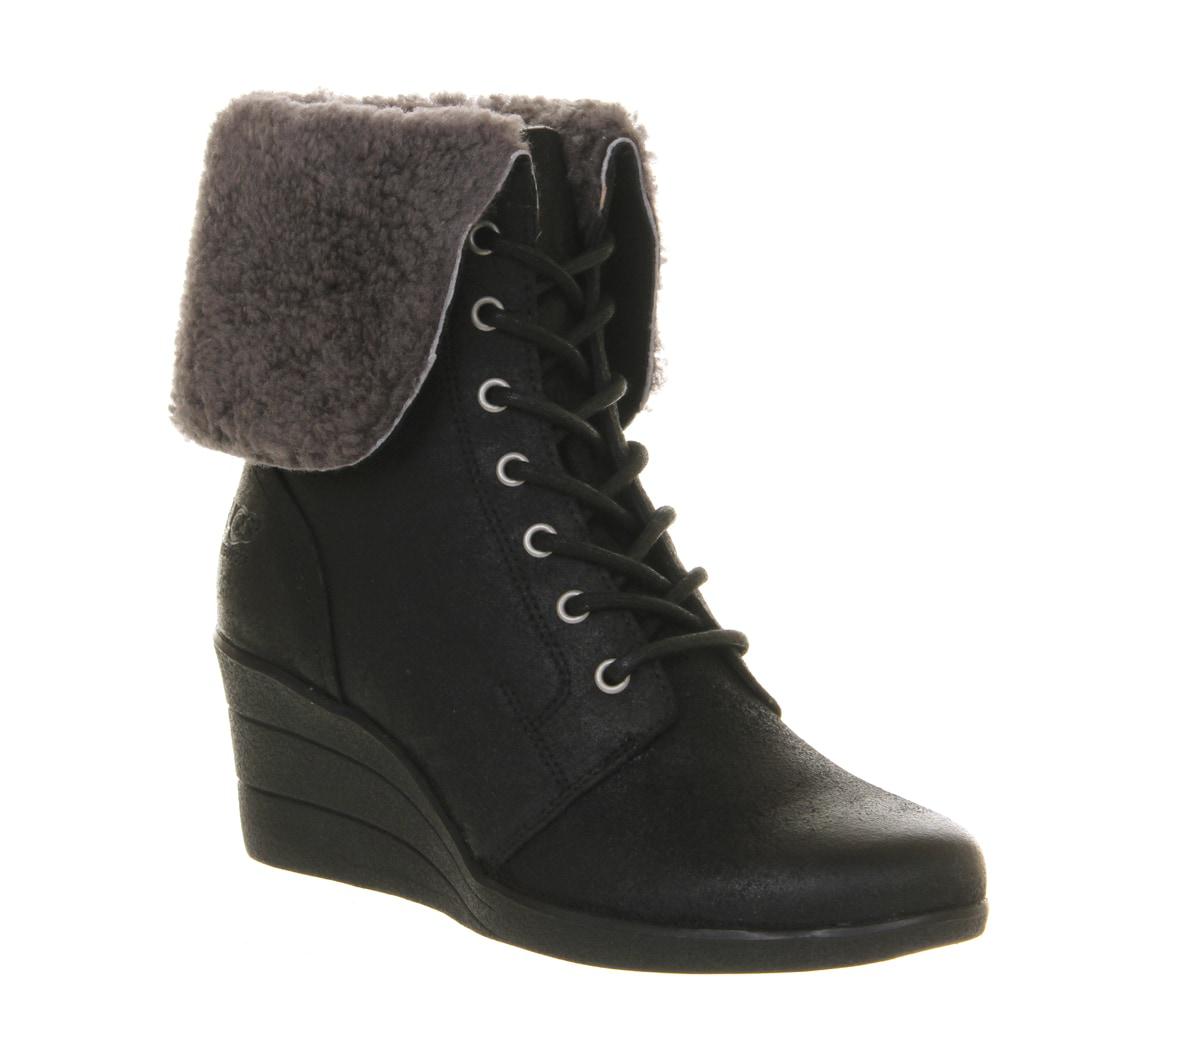 ugg wedge boot with zipper